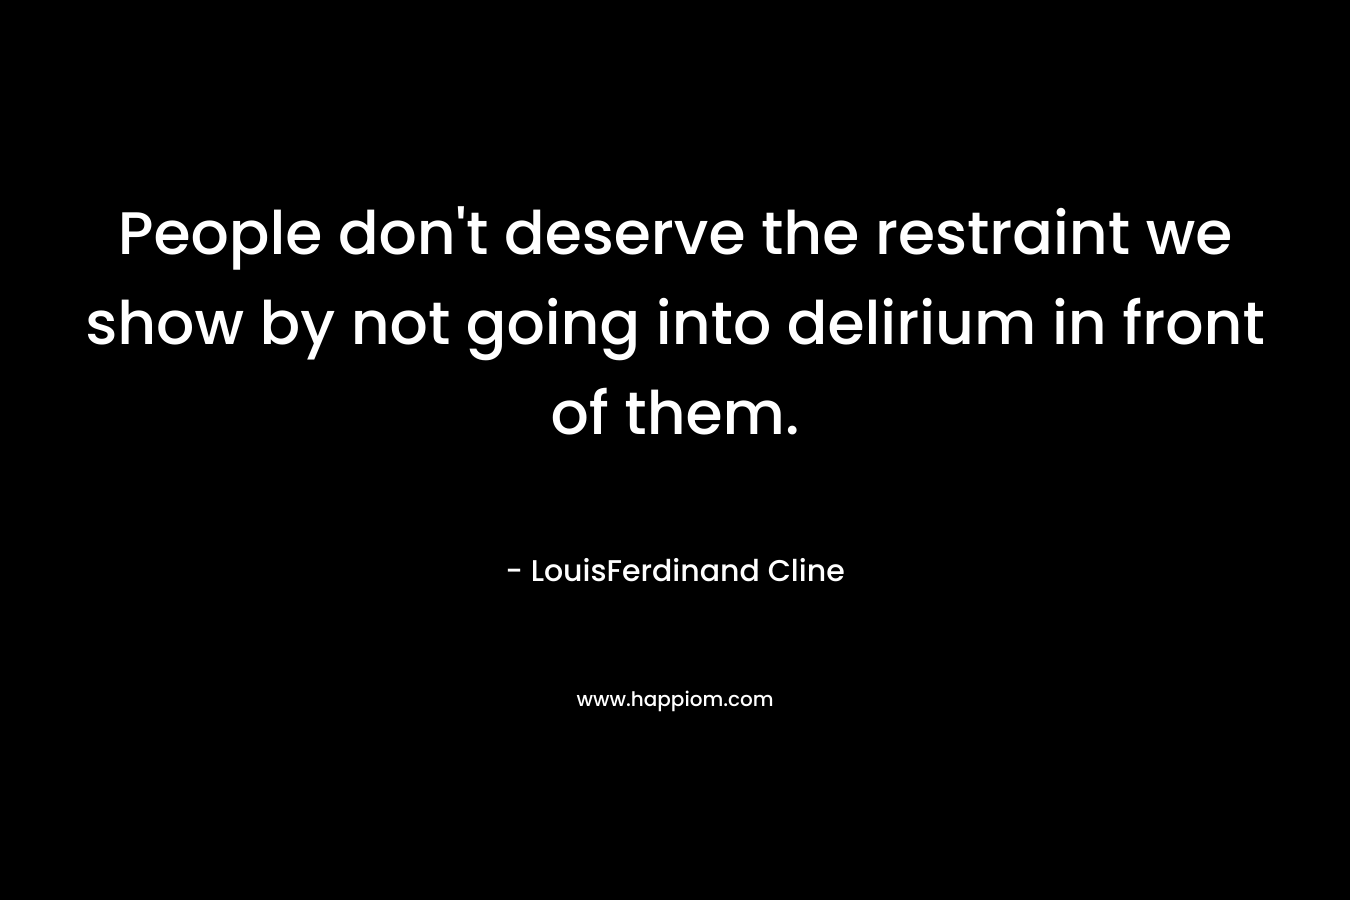 People don't deserve the restraint we show by not going into delirium in front of them.